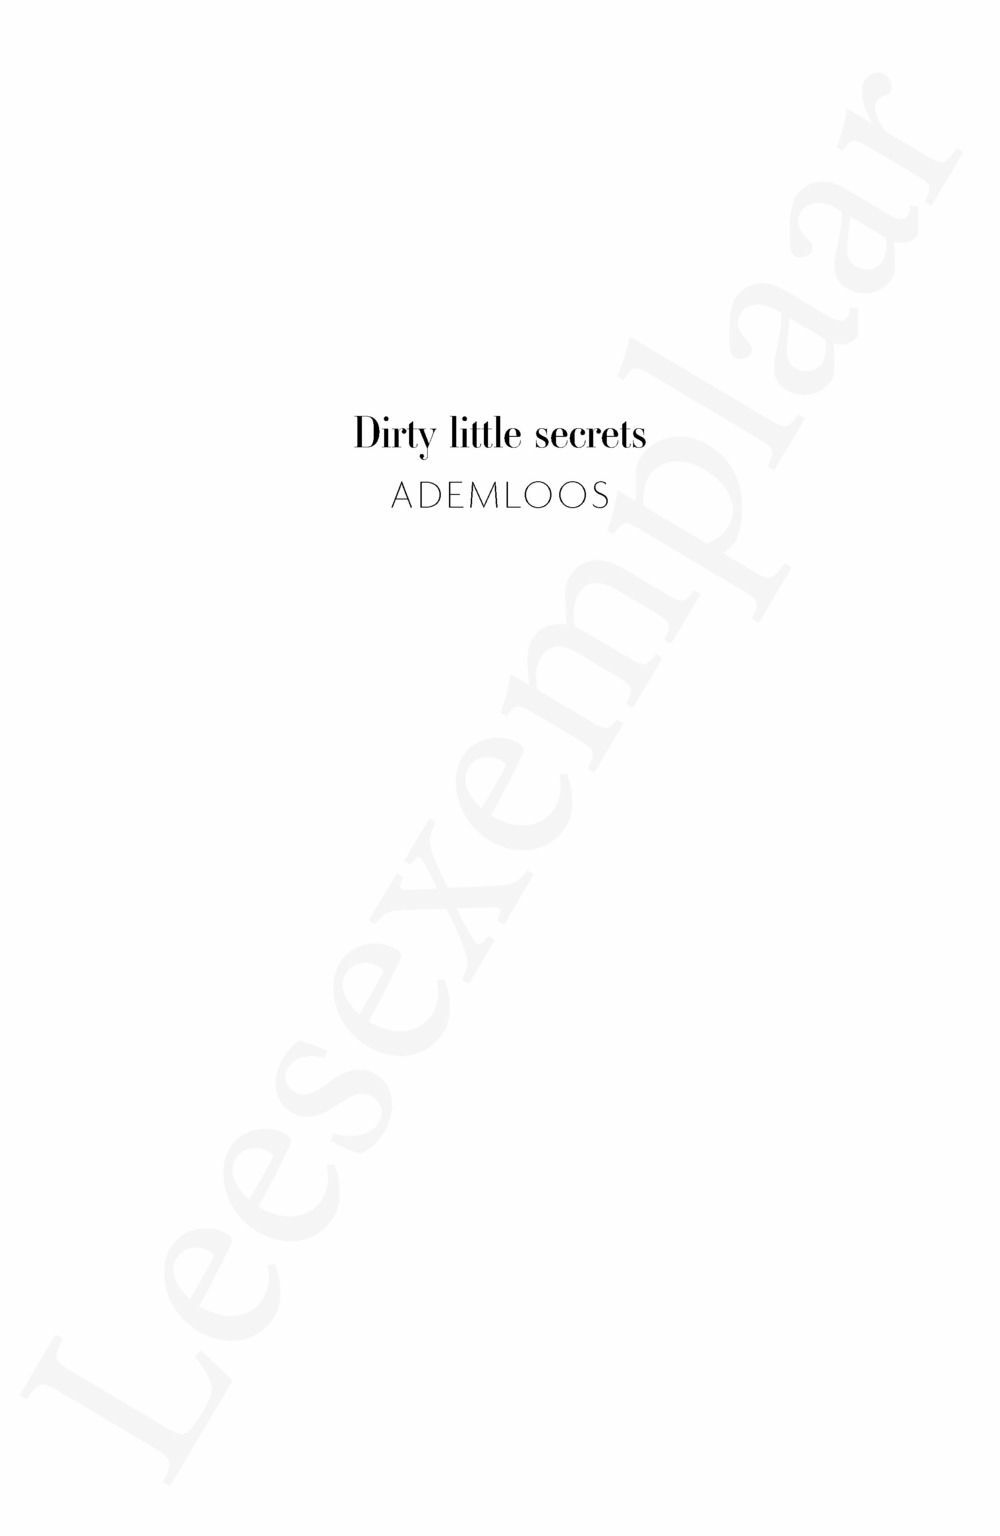 Preview: Dirty Little Secrets: Ademloos